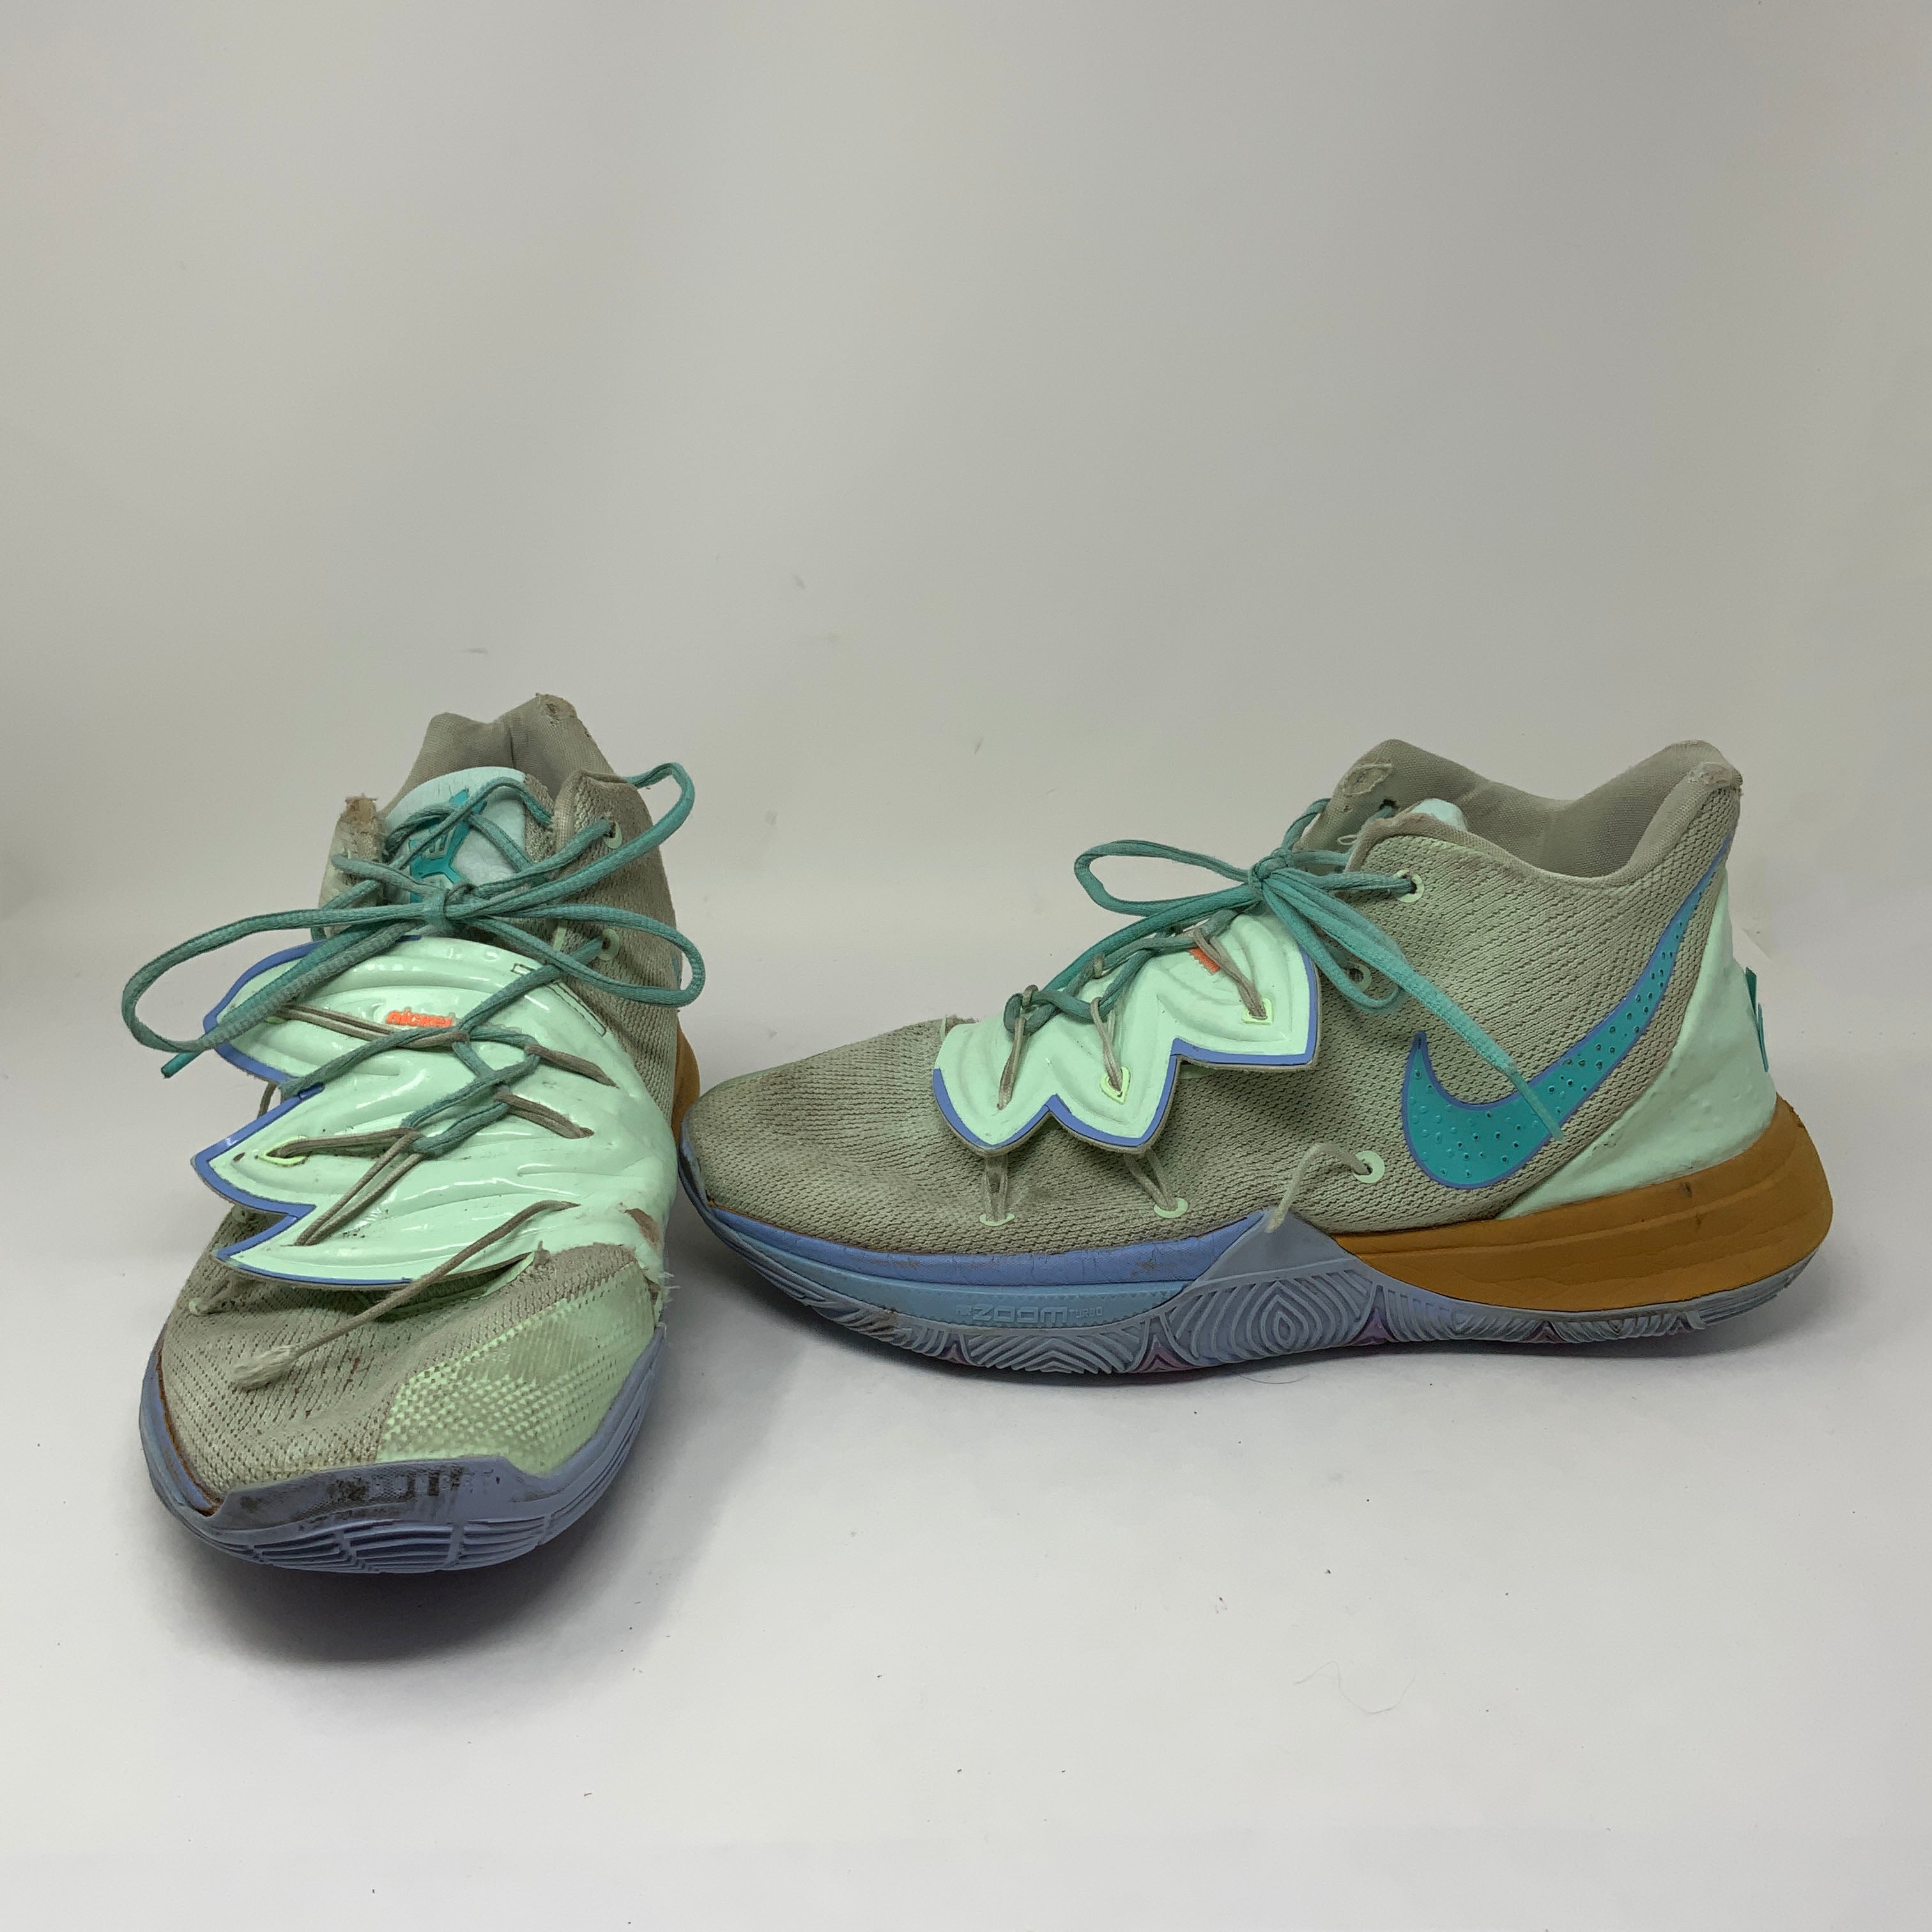 Nike Kyrie Irving Spongebob Squidward Collectible Sneake – Galore Consignment